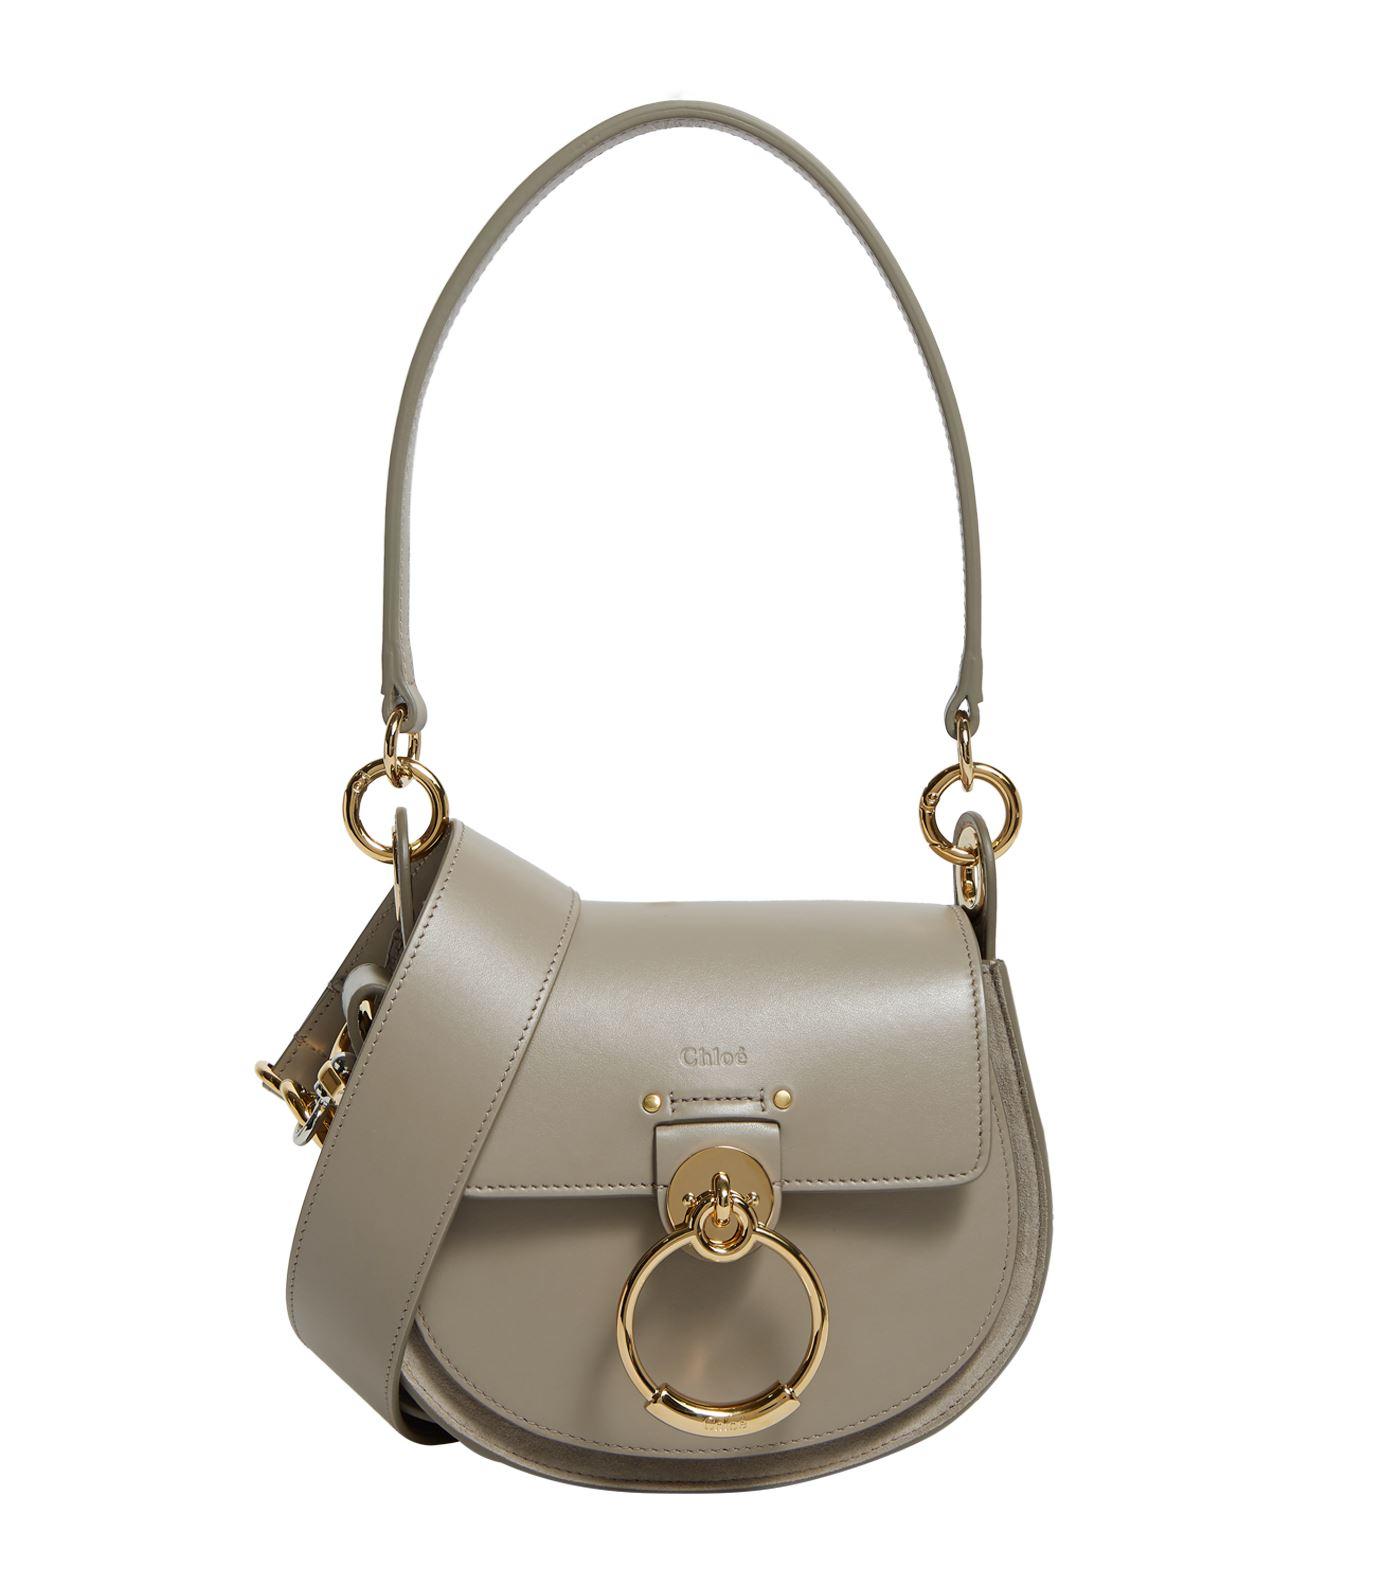 Chloé Leather Small Tess Saddle Bag in Gray - Save 20% - Lyst